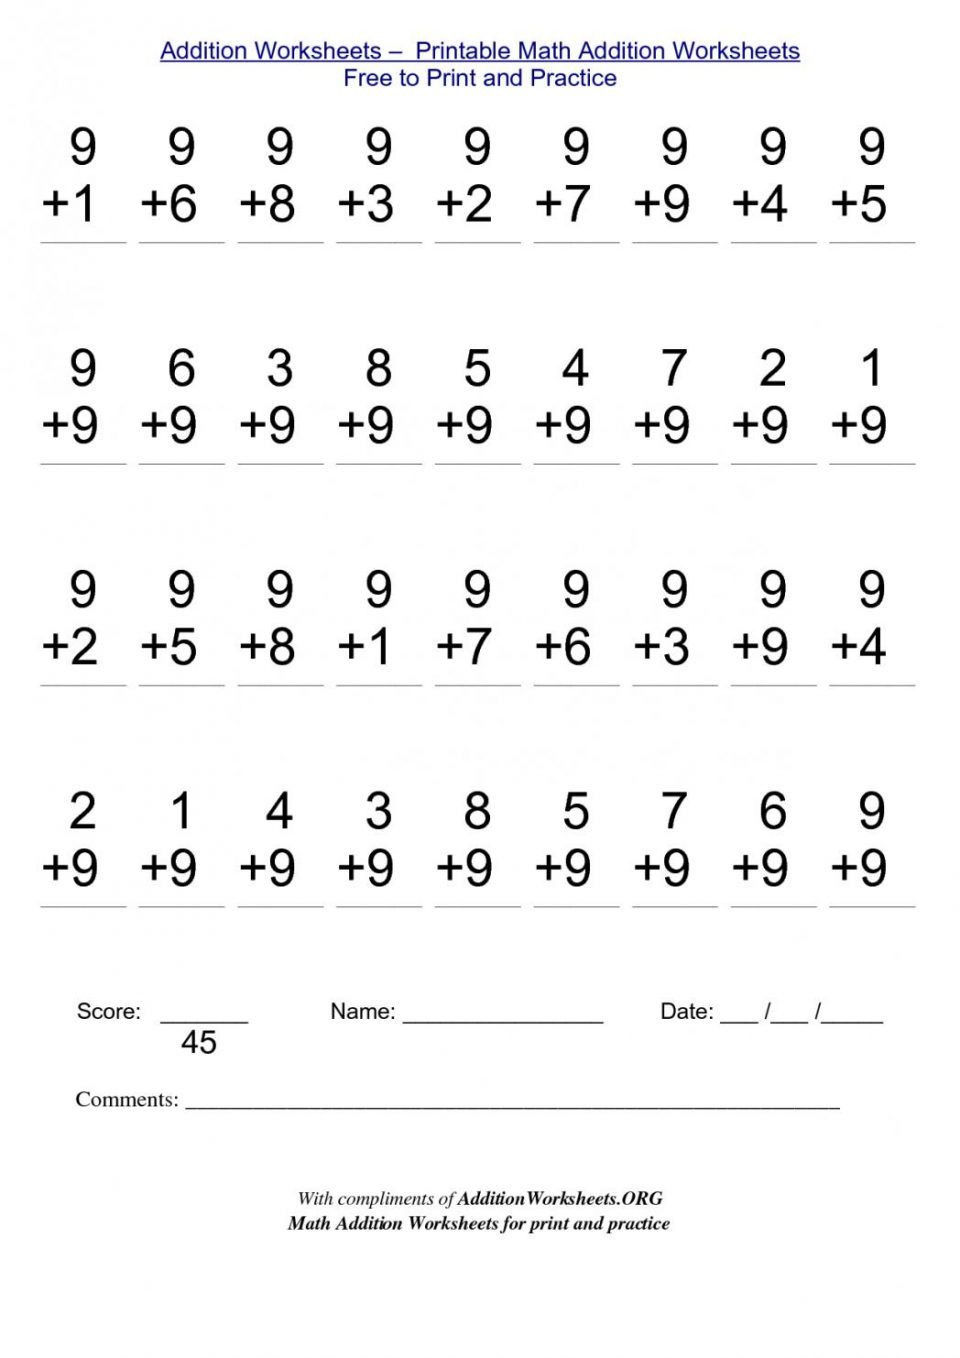 touch-math-printables-touch-math-subtraction-workbook-single-digit-touch-math-printables-touch